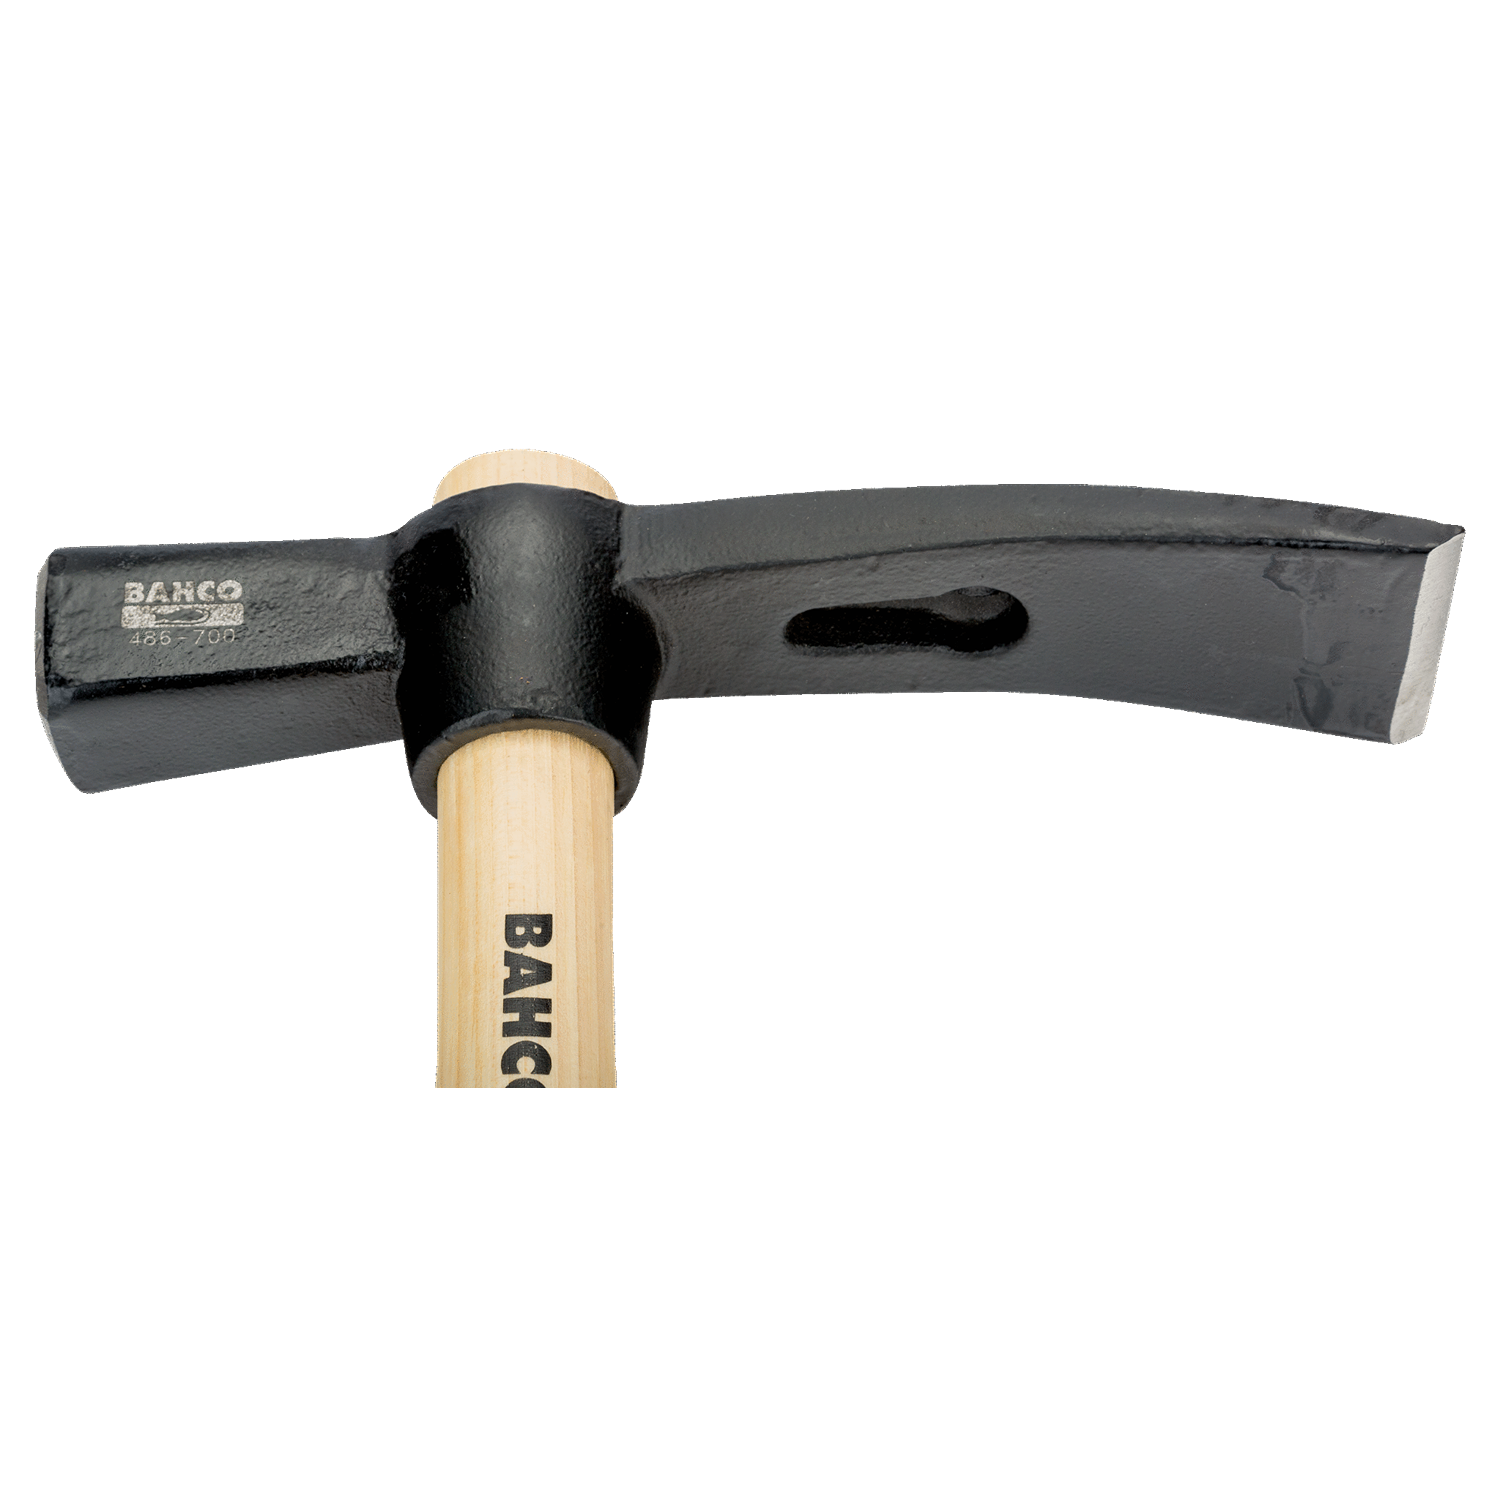 BAHCO 486-700 Spanish Type Bricklayer Hammer with Hickory Handle - Premium Bricklayer Hammer from BAHCO - Shop now at Yew Aik.